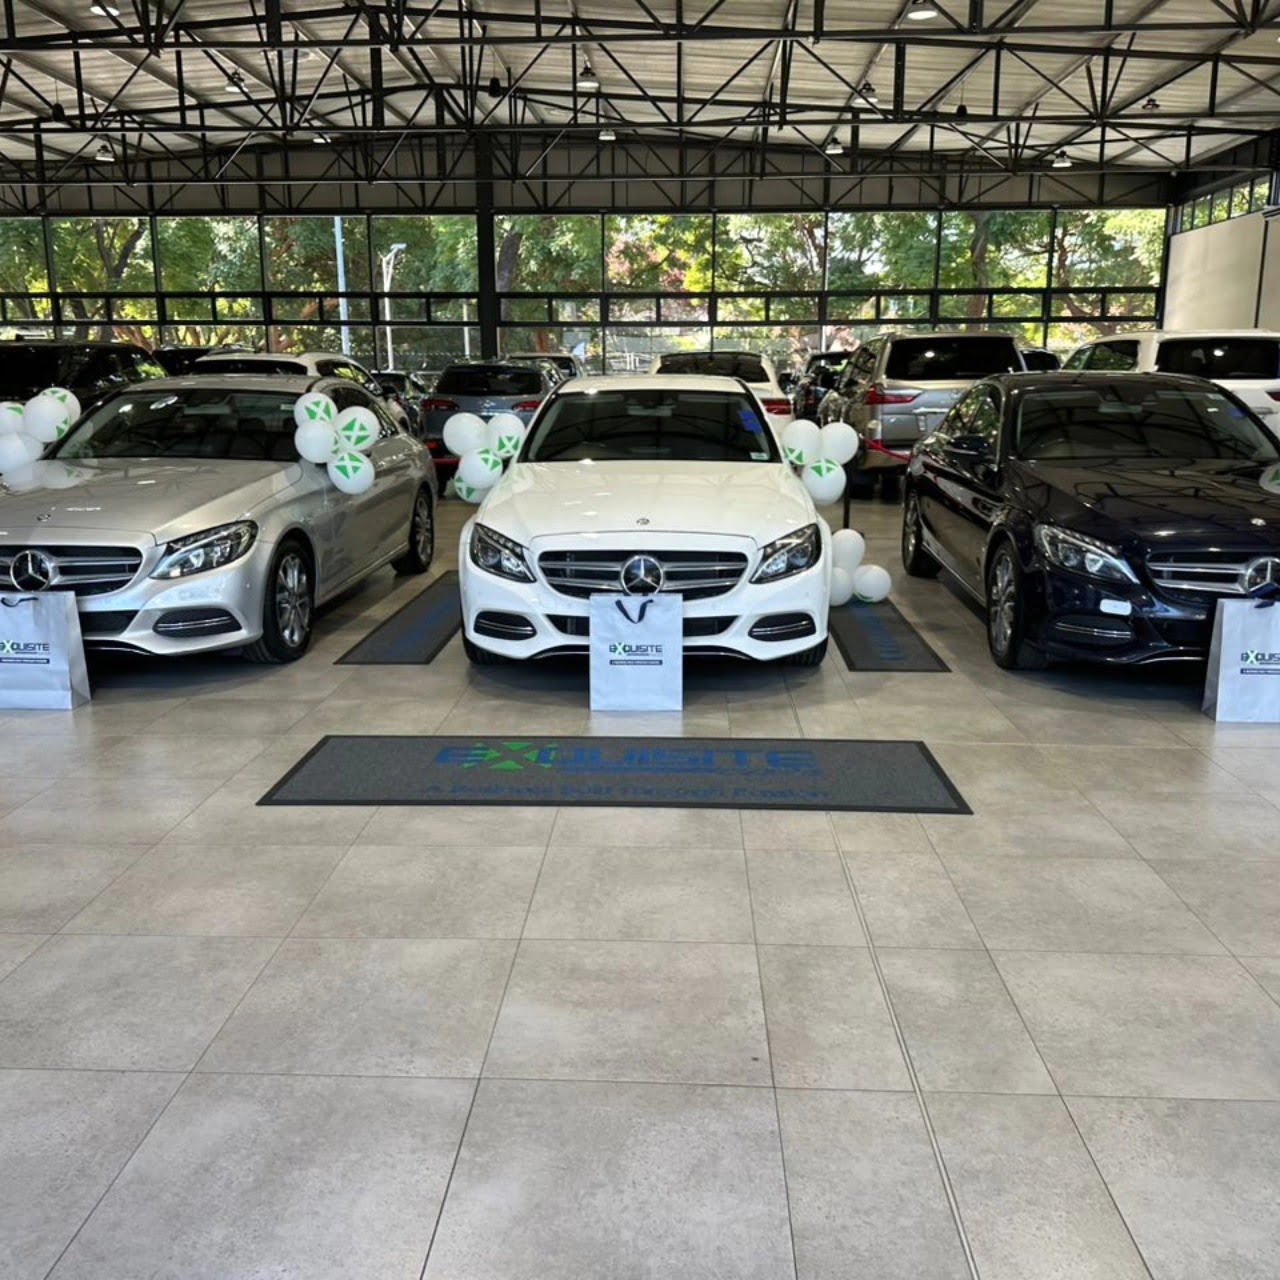 Sir Wicknell blesses Diana Samkange, Mathias Mhere & Andy Muridzo with Mercedes Benz C Classes